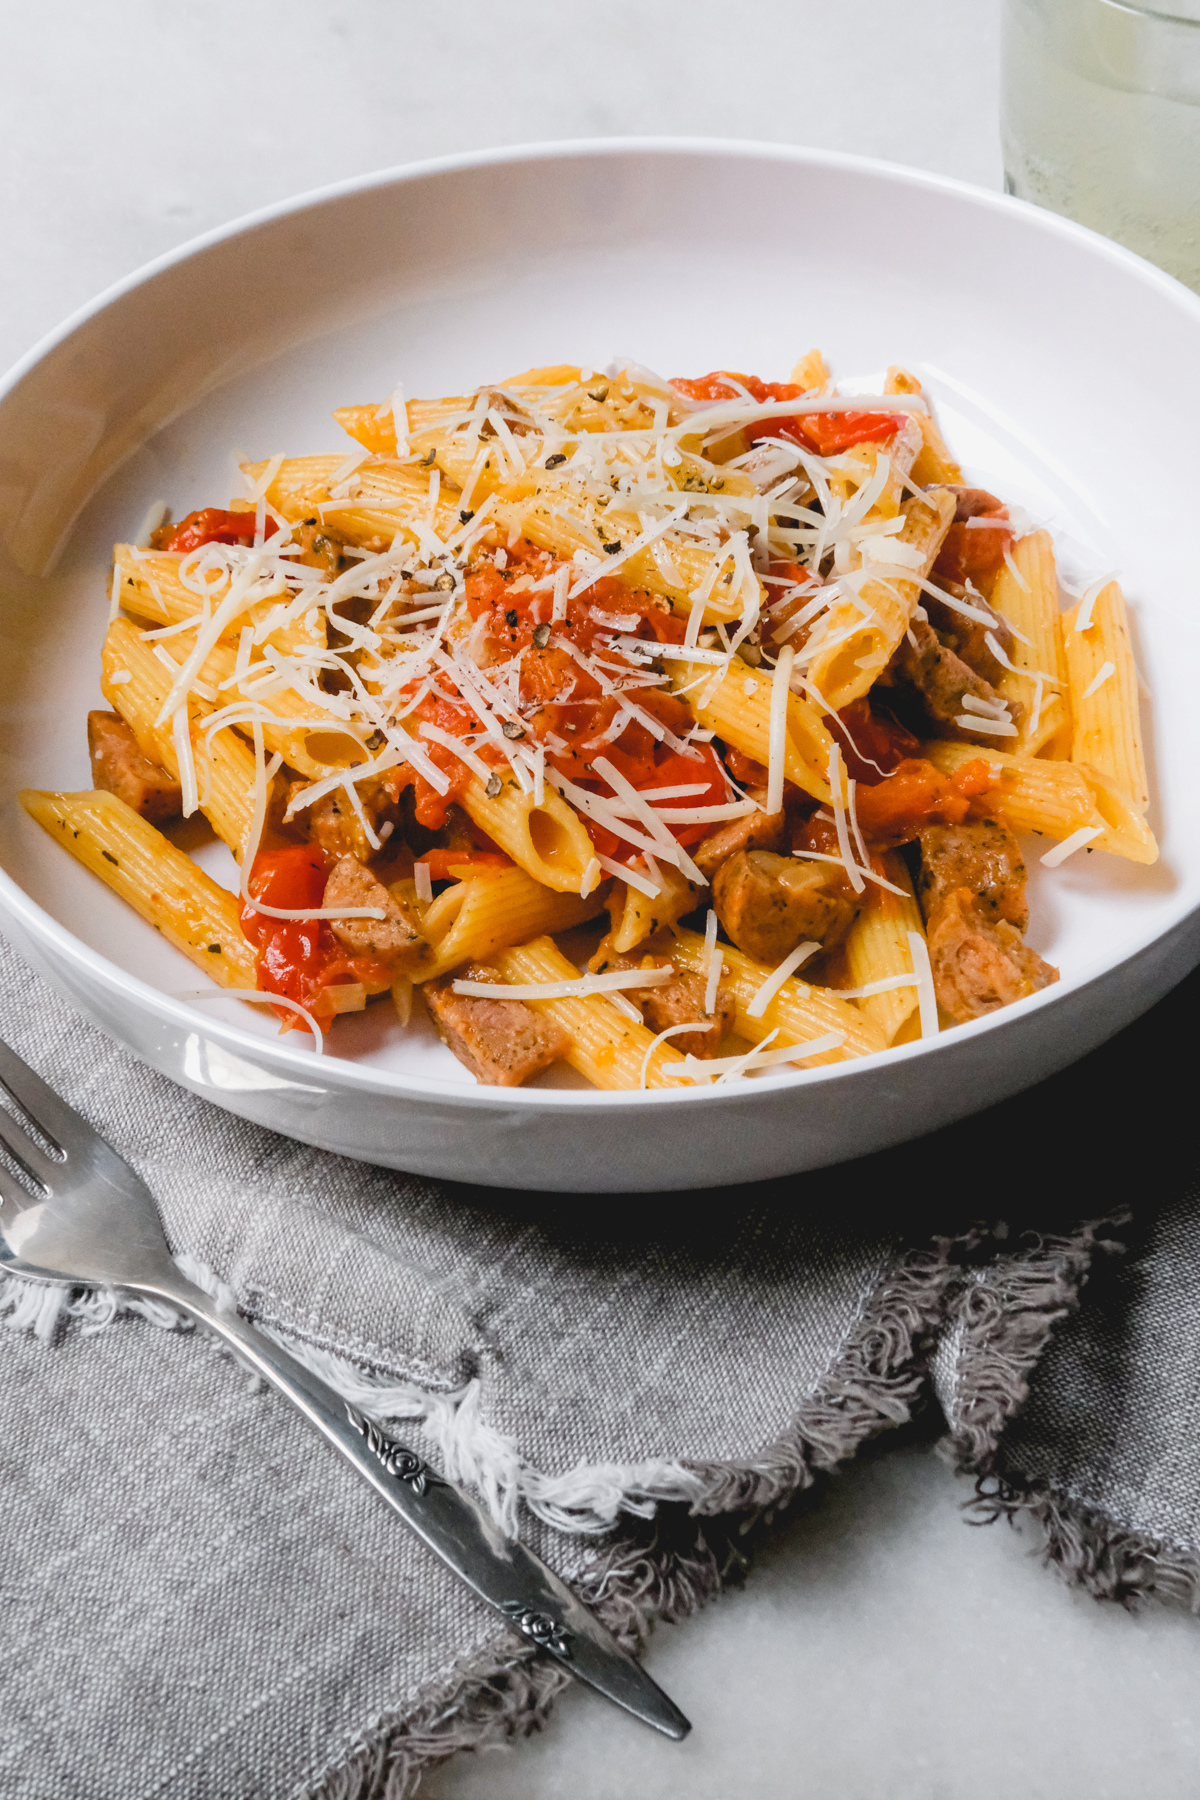 burst cherry tomato pasta with fresh cracked pepper and parmesan in a dish ready to eat